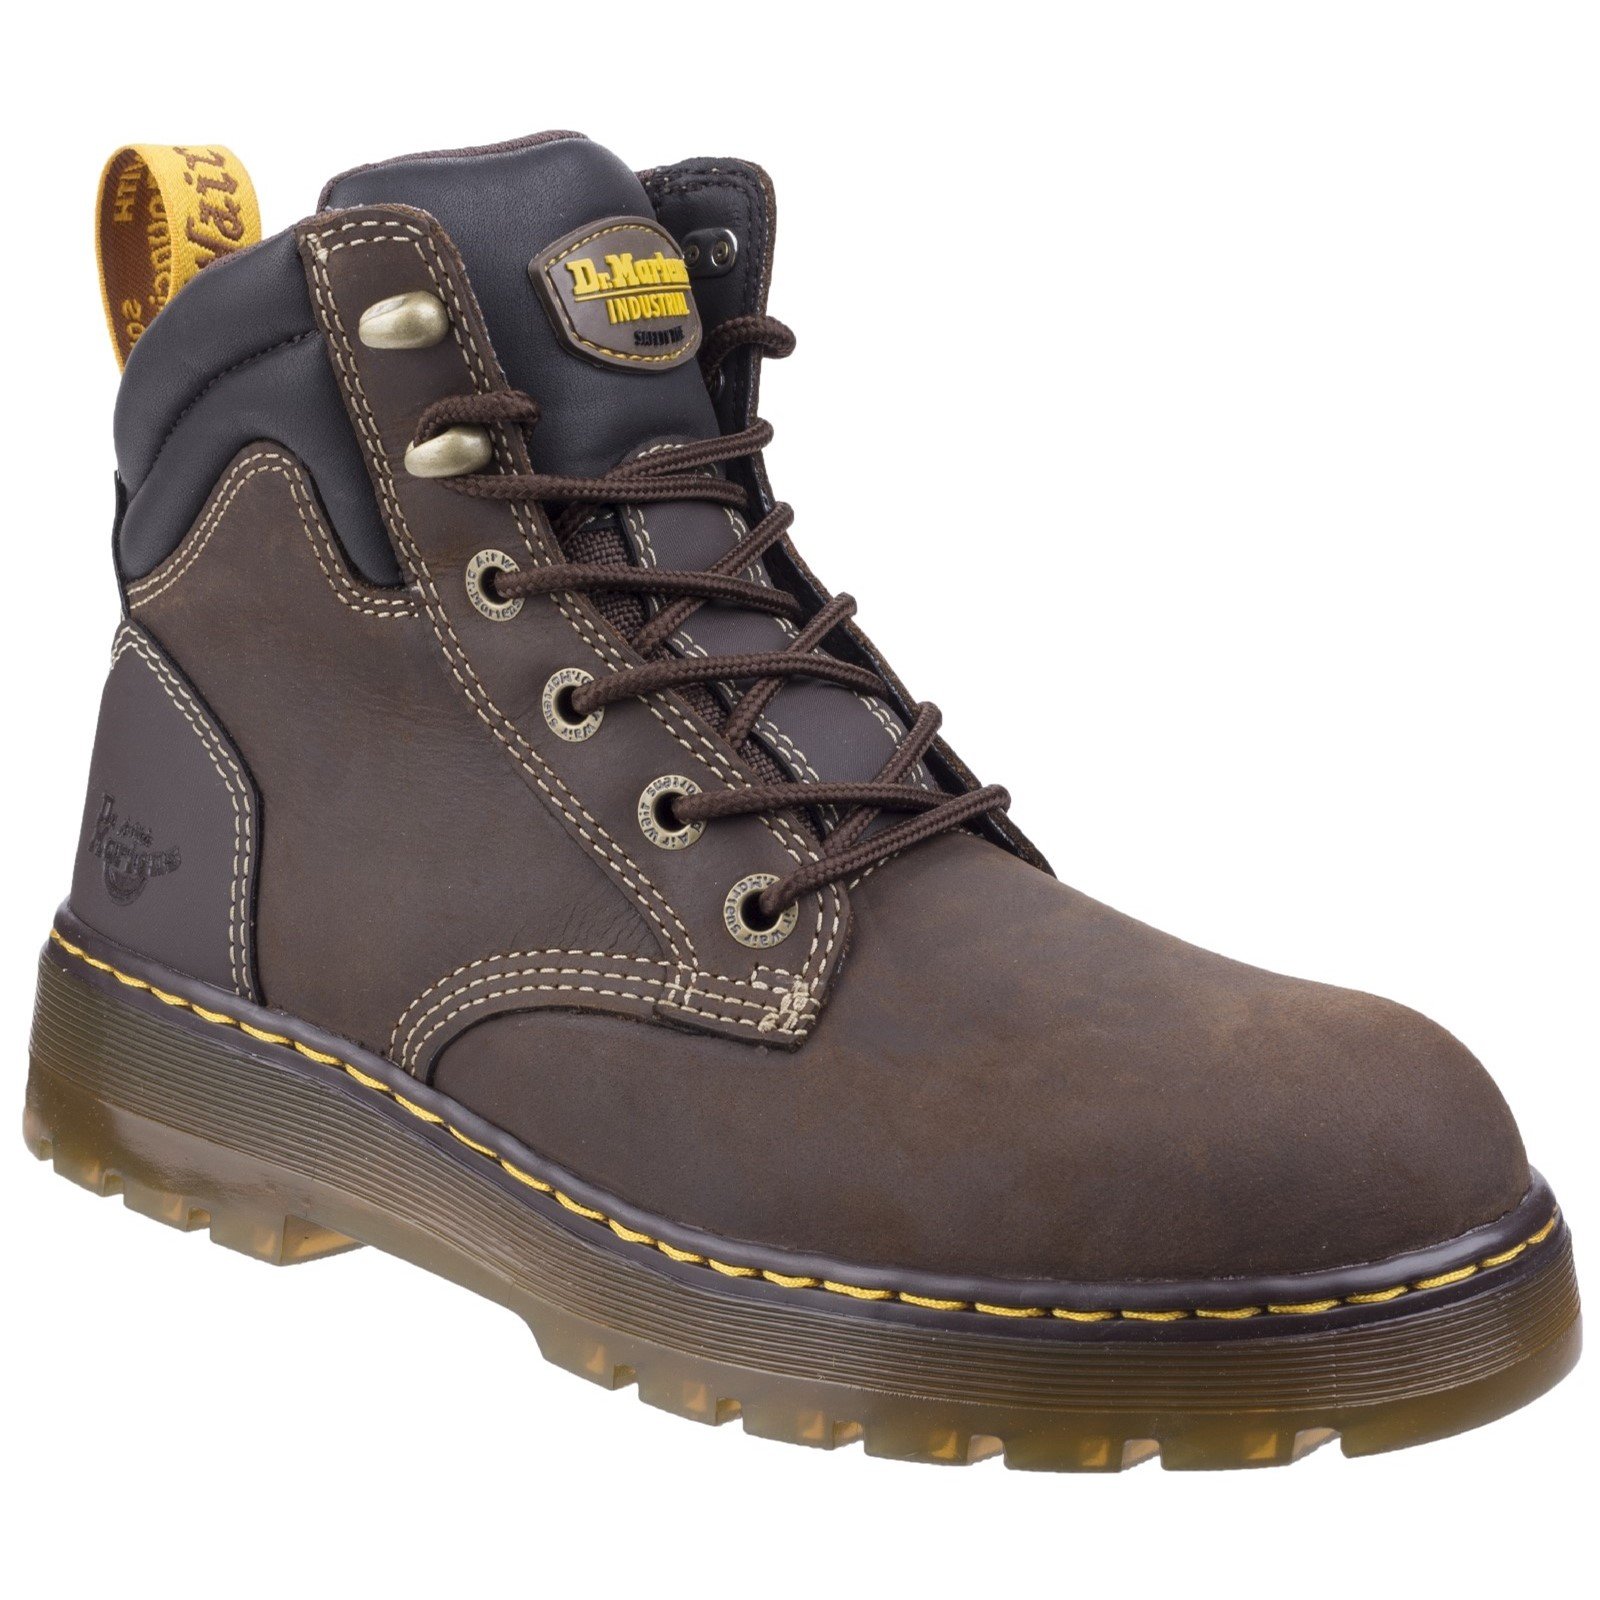 Dr Martens Unisex Brace Hiking Style Safety Boot Various Colours 27702-46606 - Dark Brown Republic 3